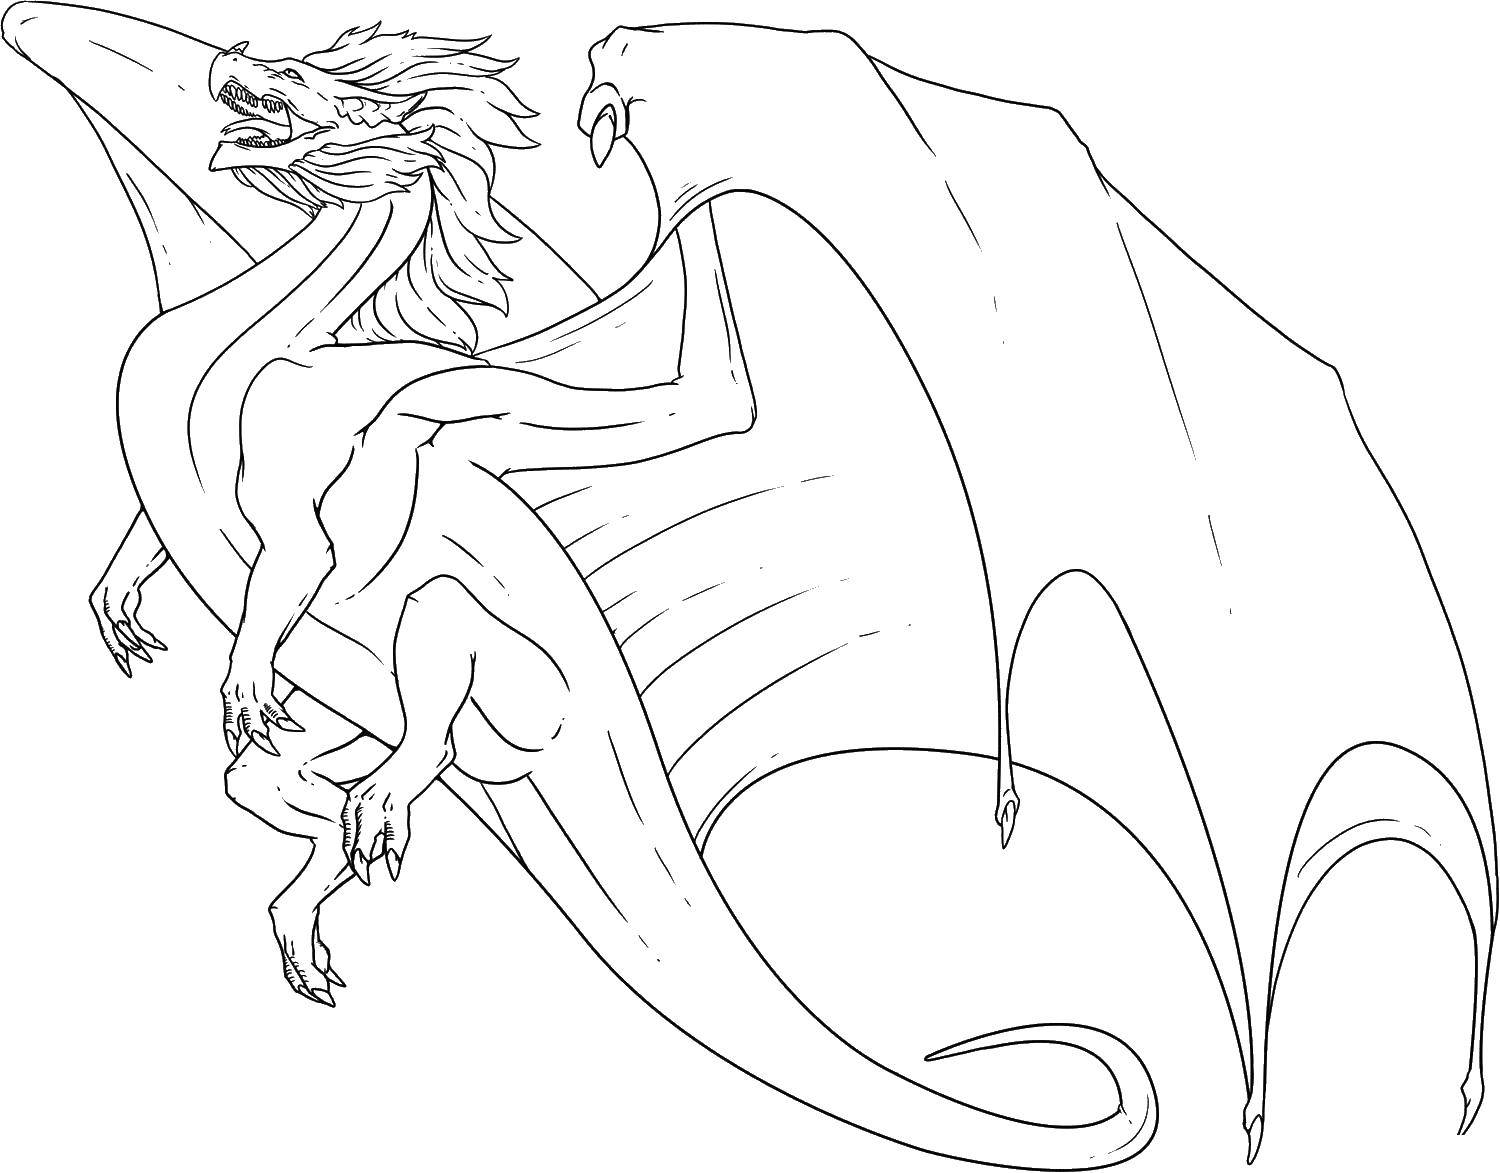 Coloring A large flying dragon. Category Dragons. Tags:  dragons, dragon, wings.